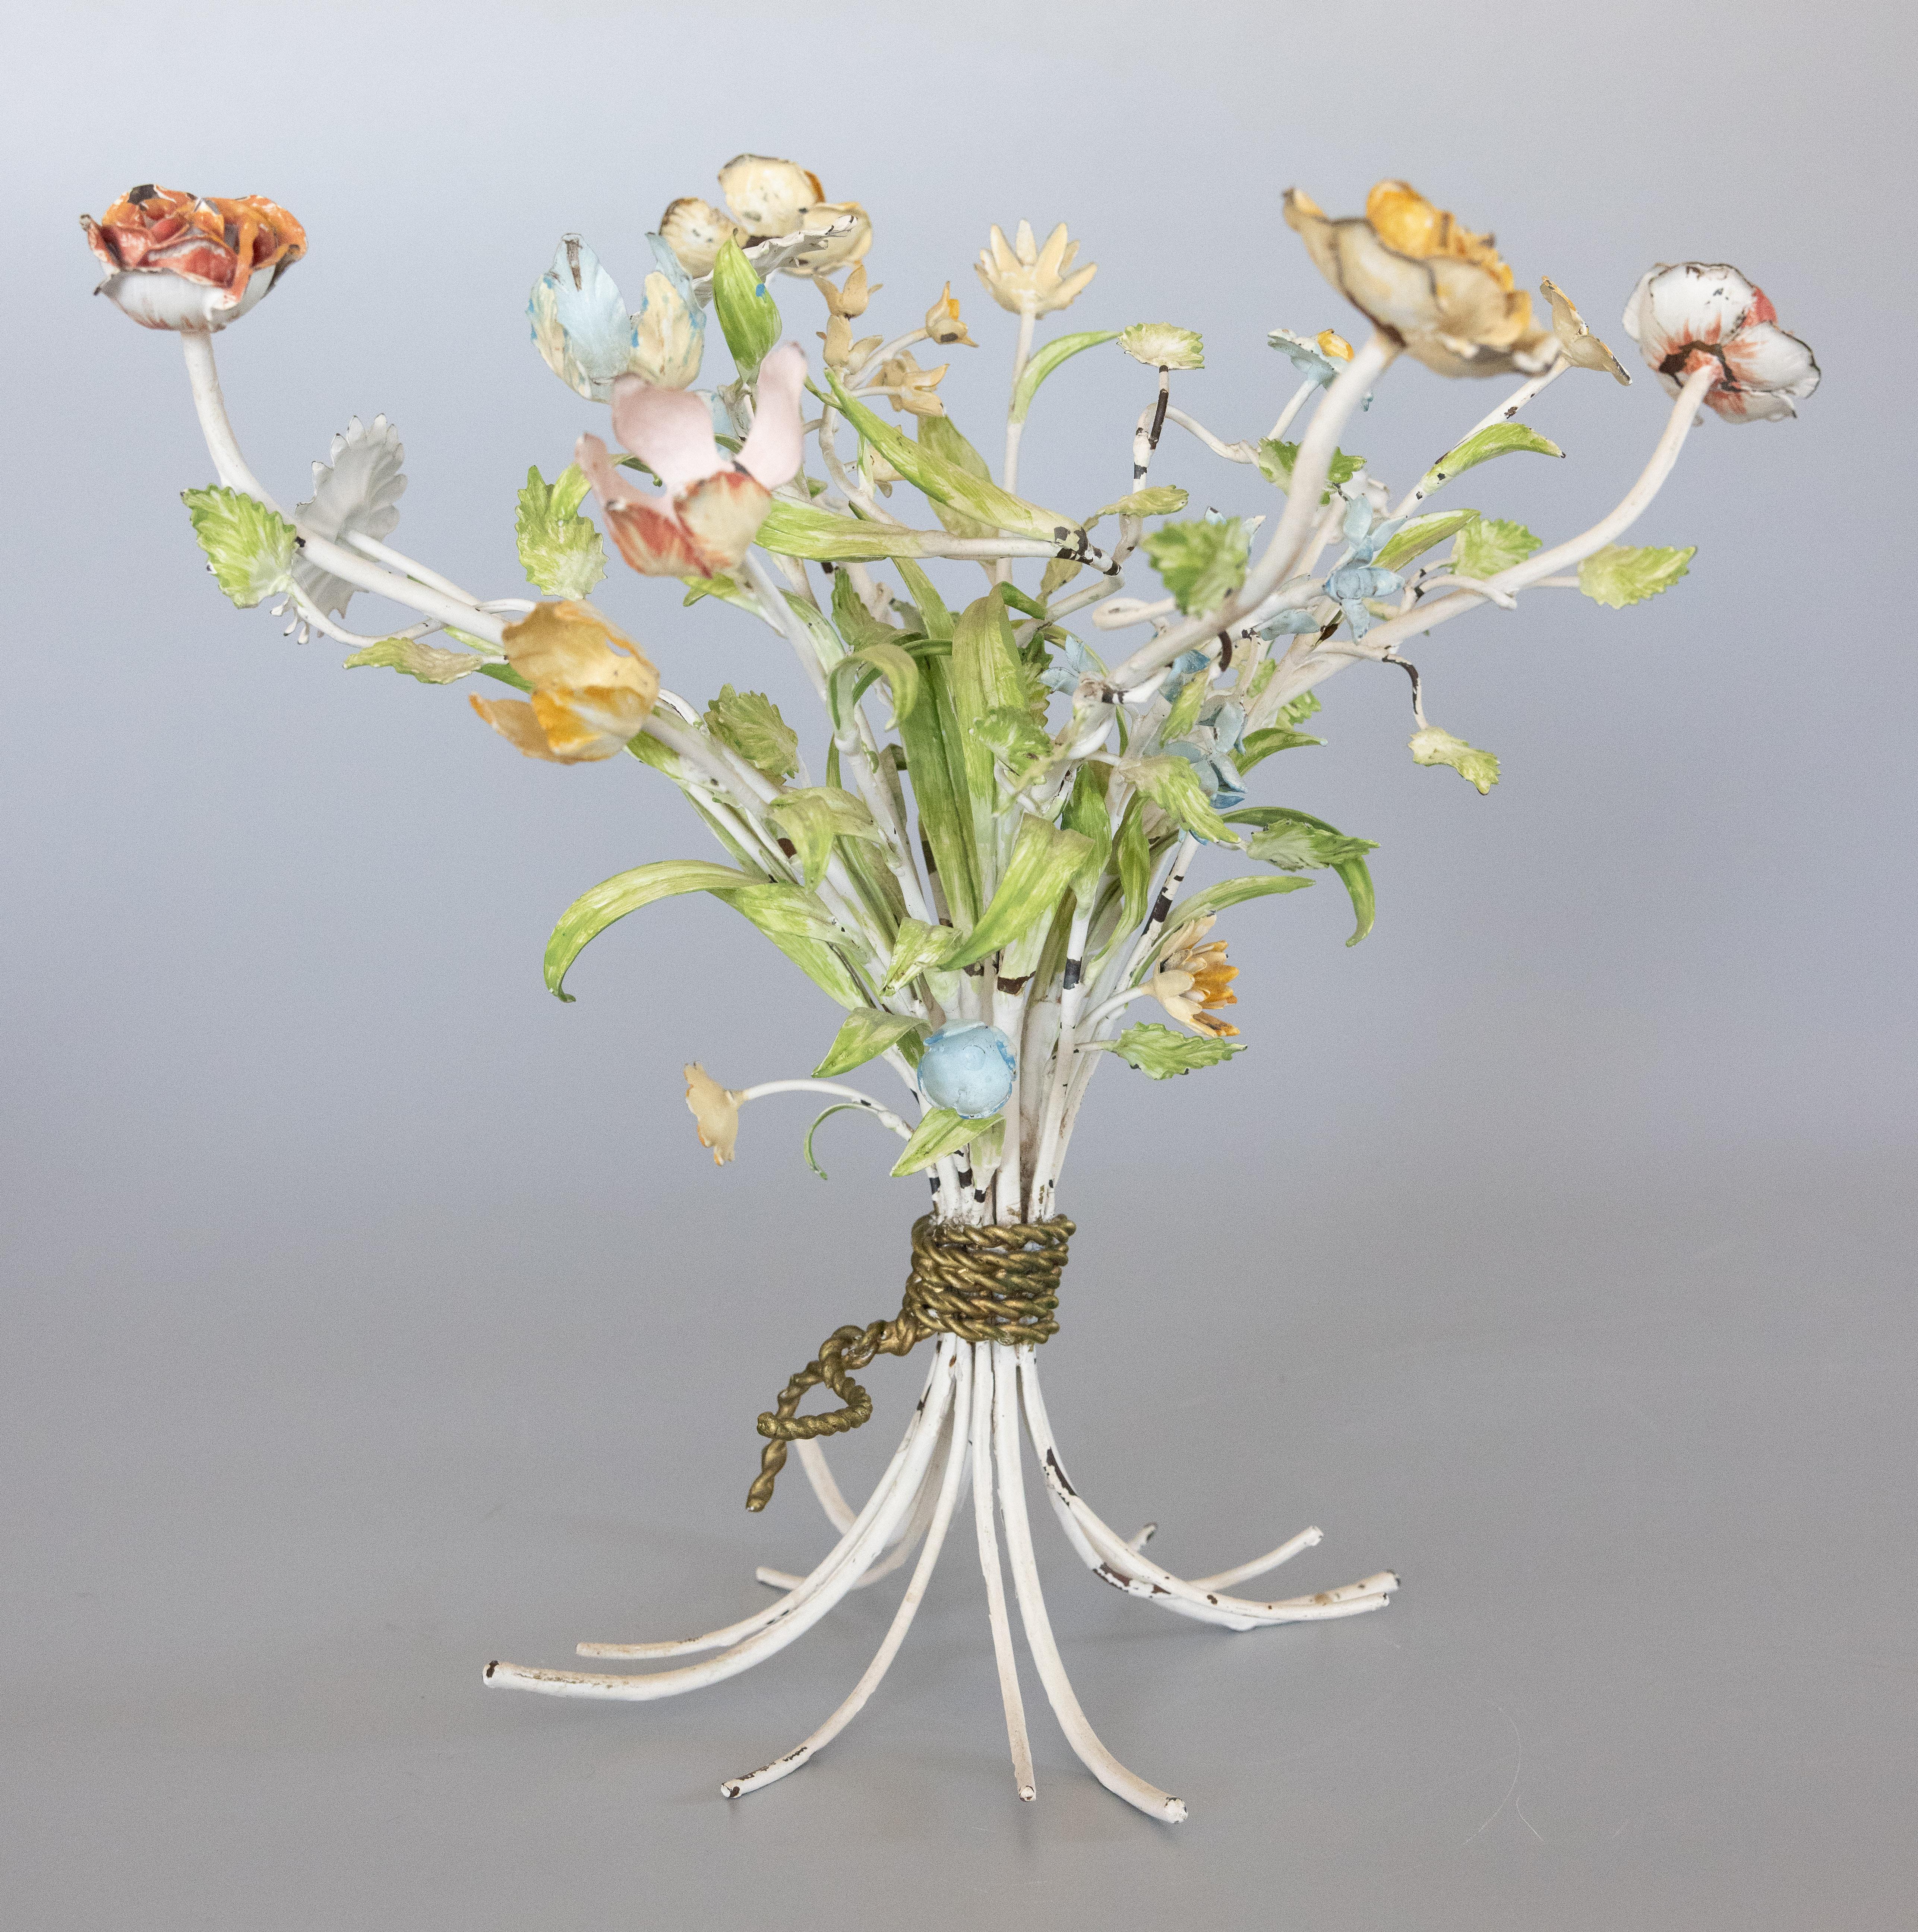 A lovely vintage Italian tole floral spray flower arrangement bouquet centerpiece, circa 1950. This charming floral arrangement is a nice large size with hand painted roses, daisies, tulips, and bellflowers in delicate pastel shades. It would be